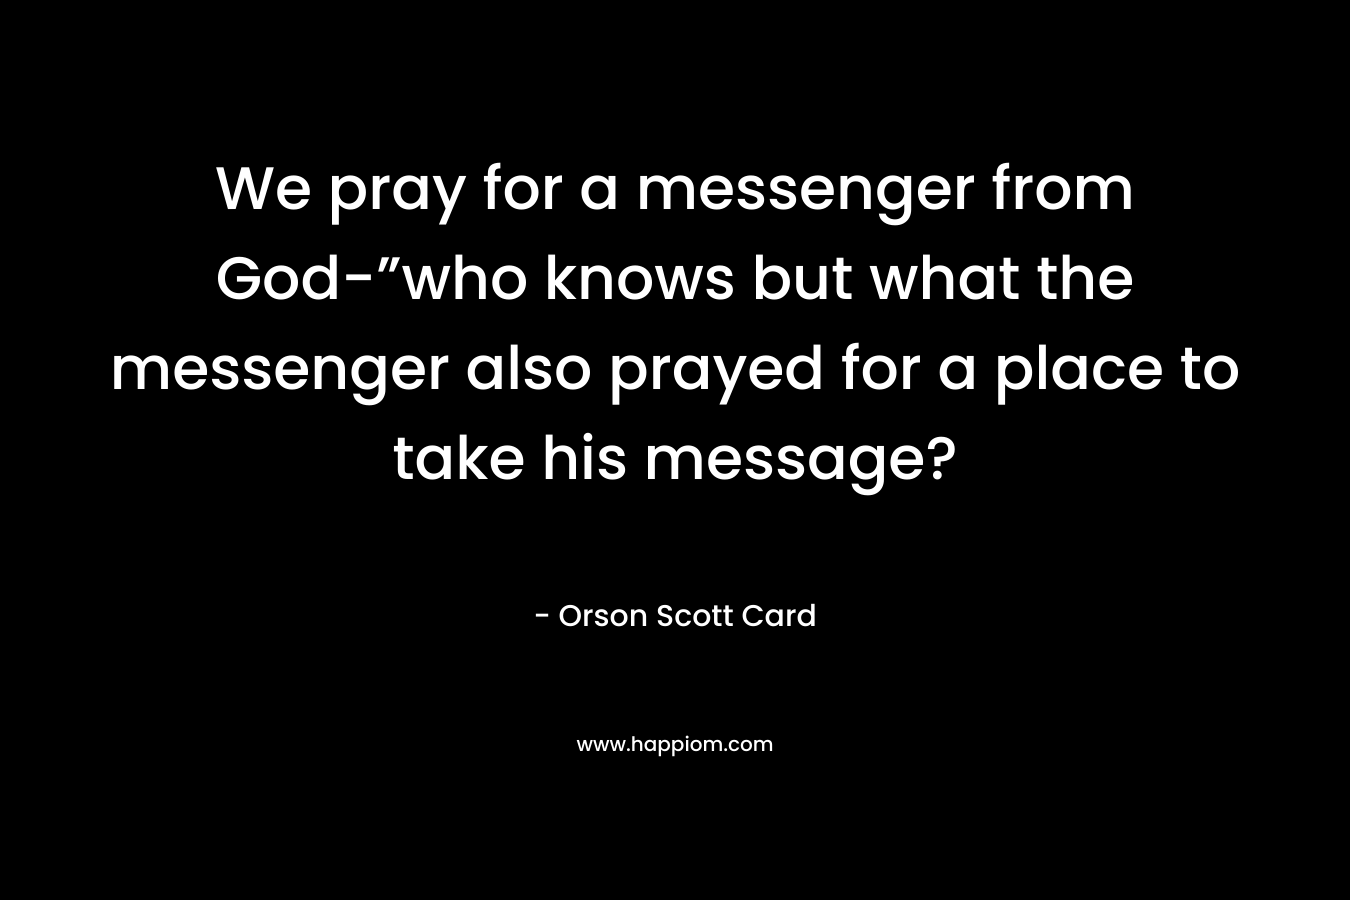 We pray for a messenger from God-”who knows but what the messenger also prayed for a place to take his message?